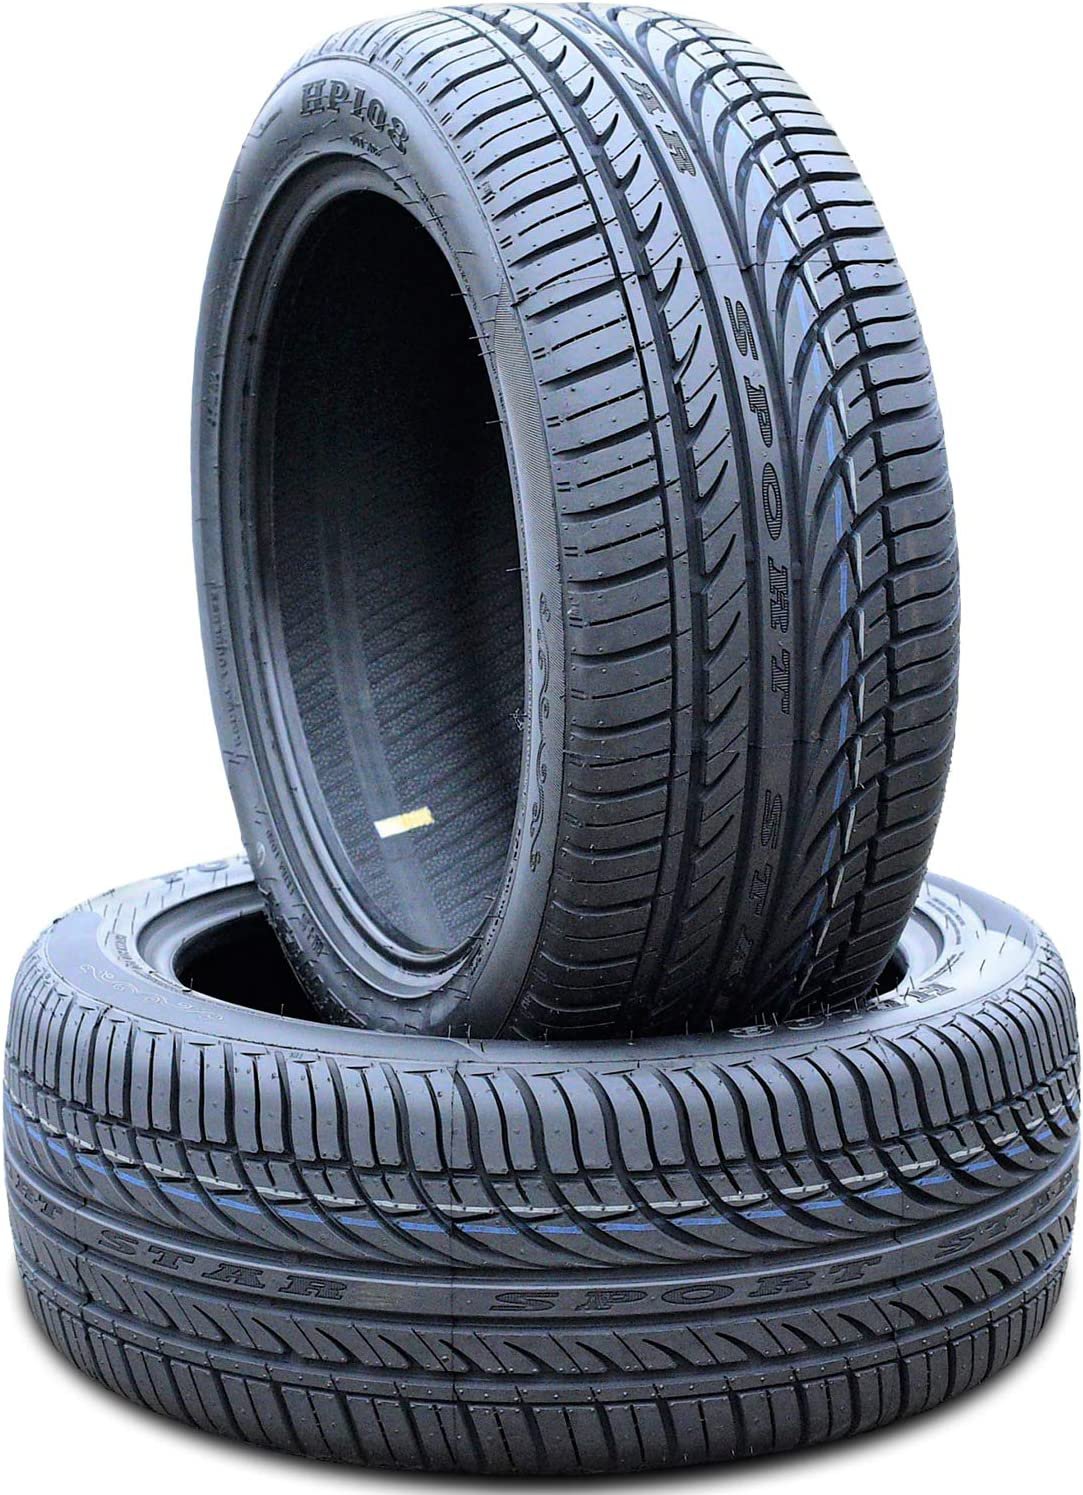 Set of 2 (TWO) Fullway HP108 All-Season High Performance Radial Tires-225/45R17